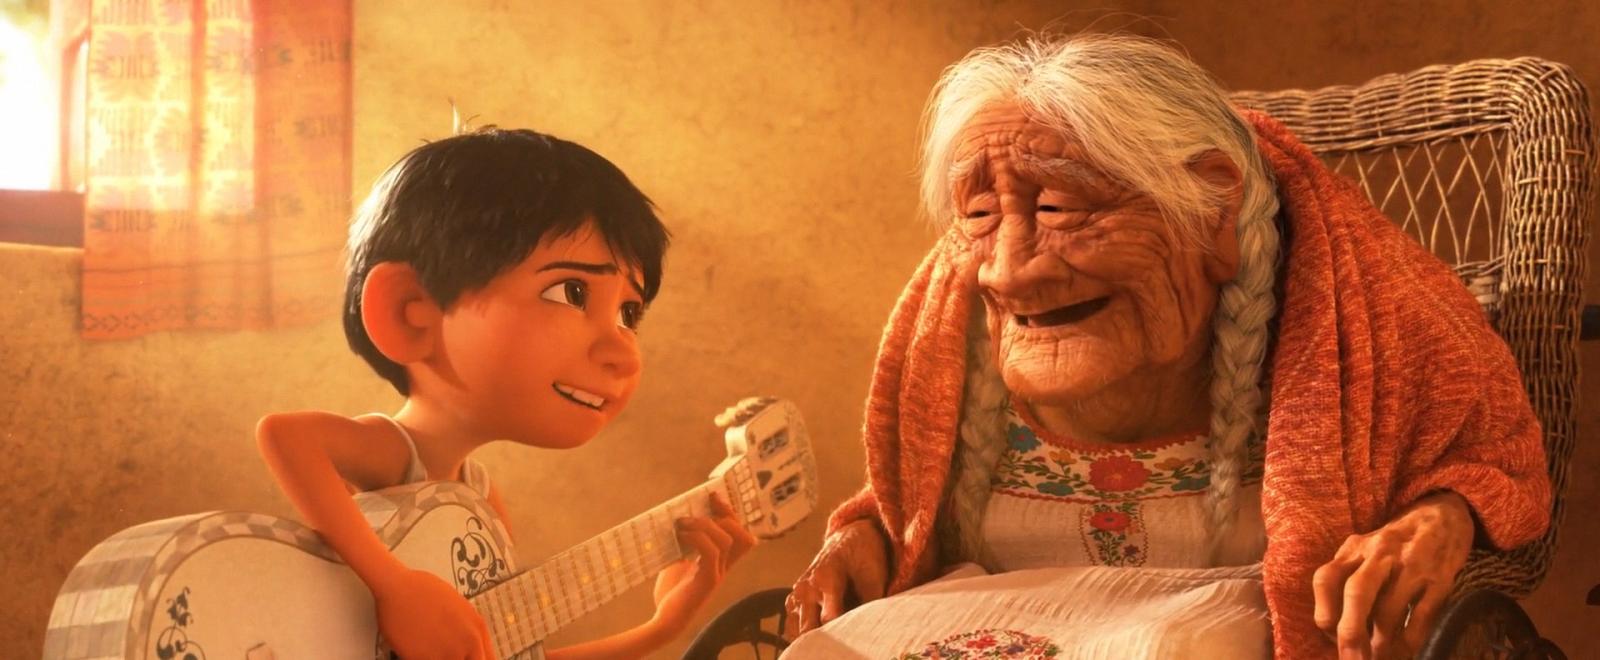 The 7 Most Emotional Moments in Pixar Movies Ranked - image 7